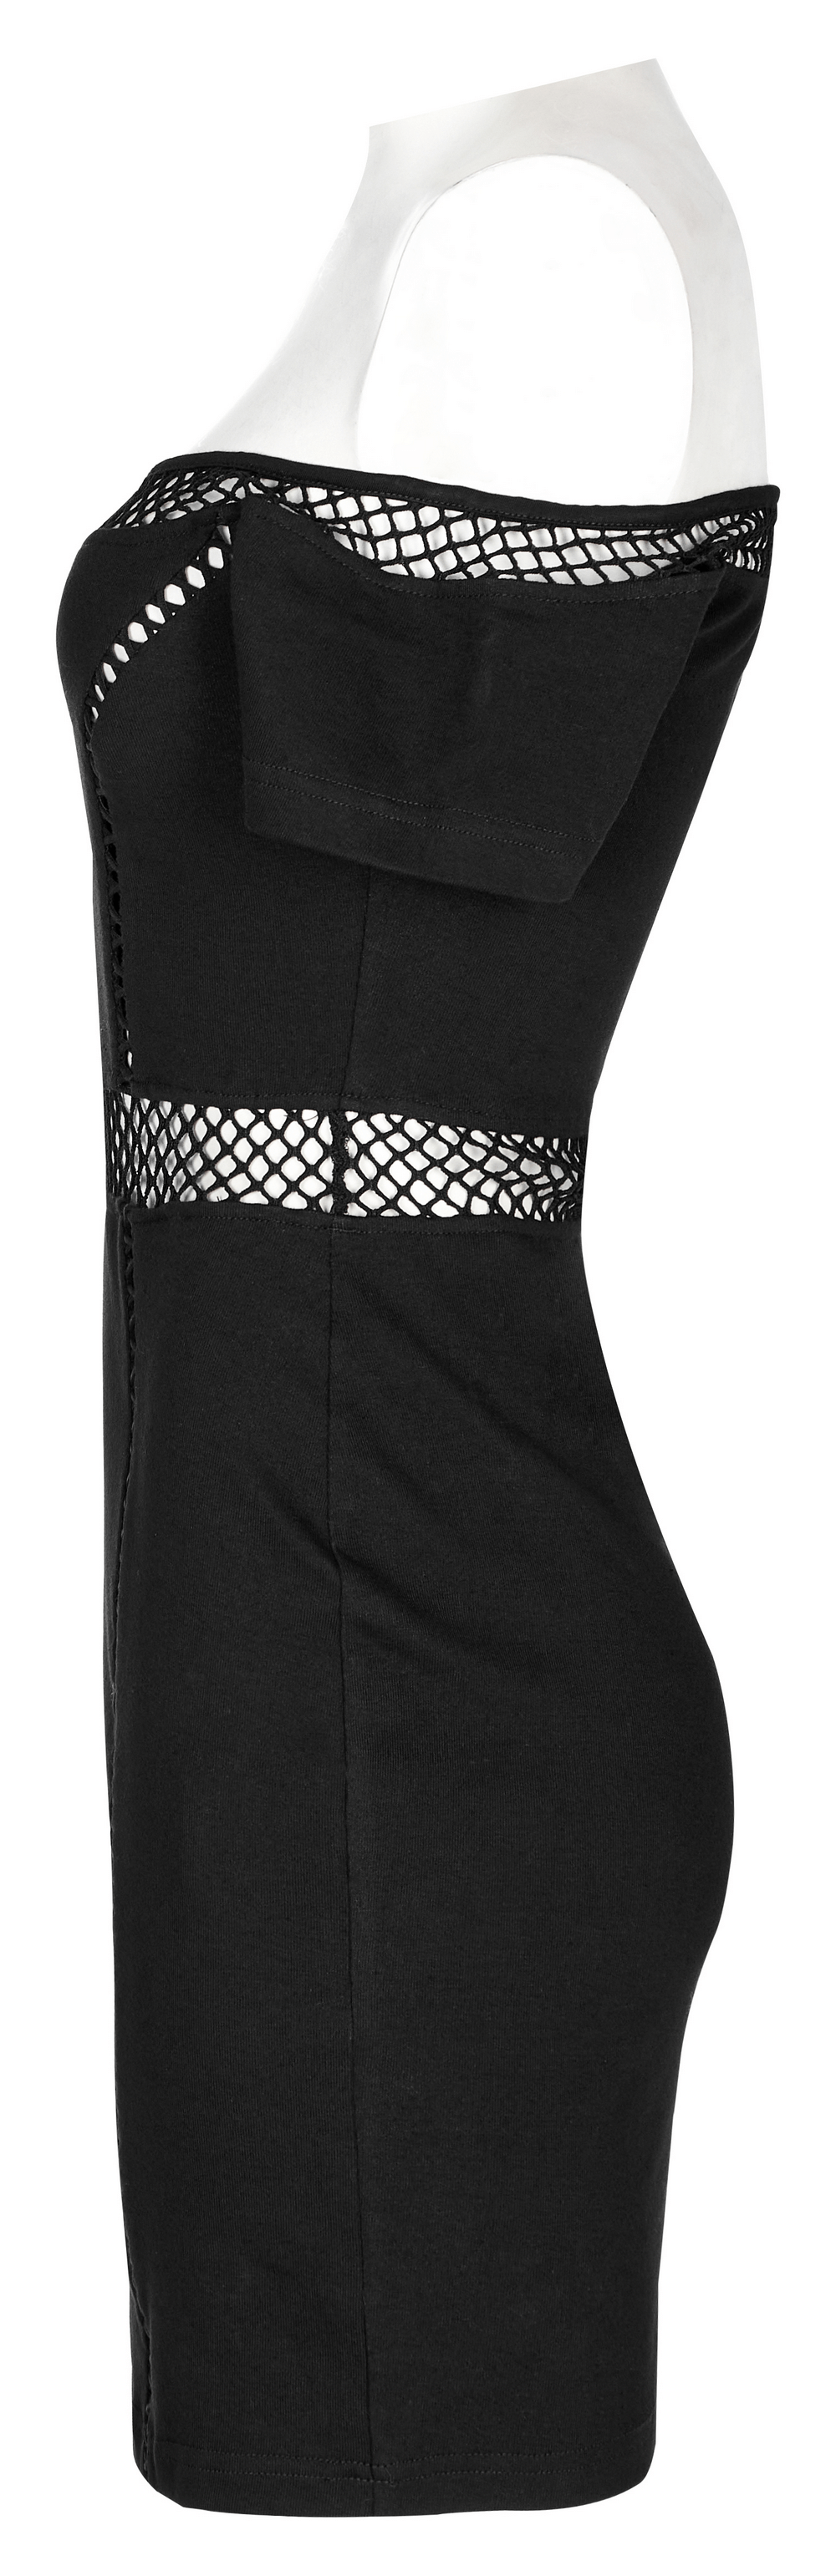 Chic Off-Shoulder Gothic Mini Dress with Mesh Detail - HARD'N'HEAVY